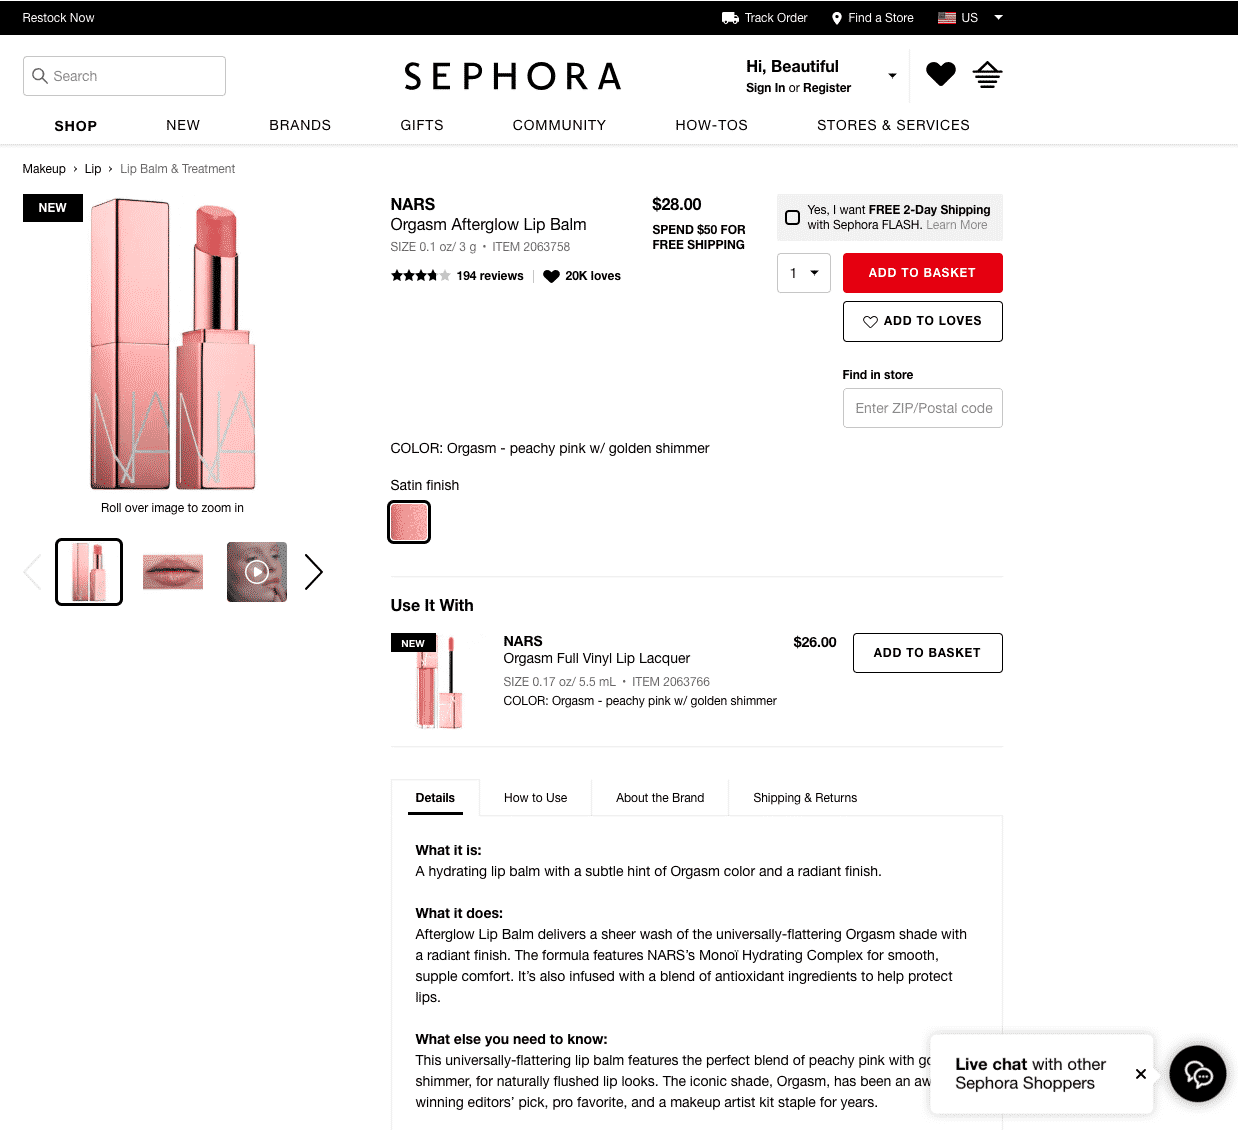 Sephora: how connectivity boosts their loss prevention strategy - Nedap